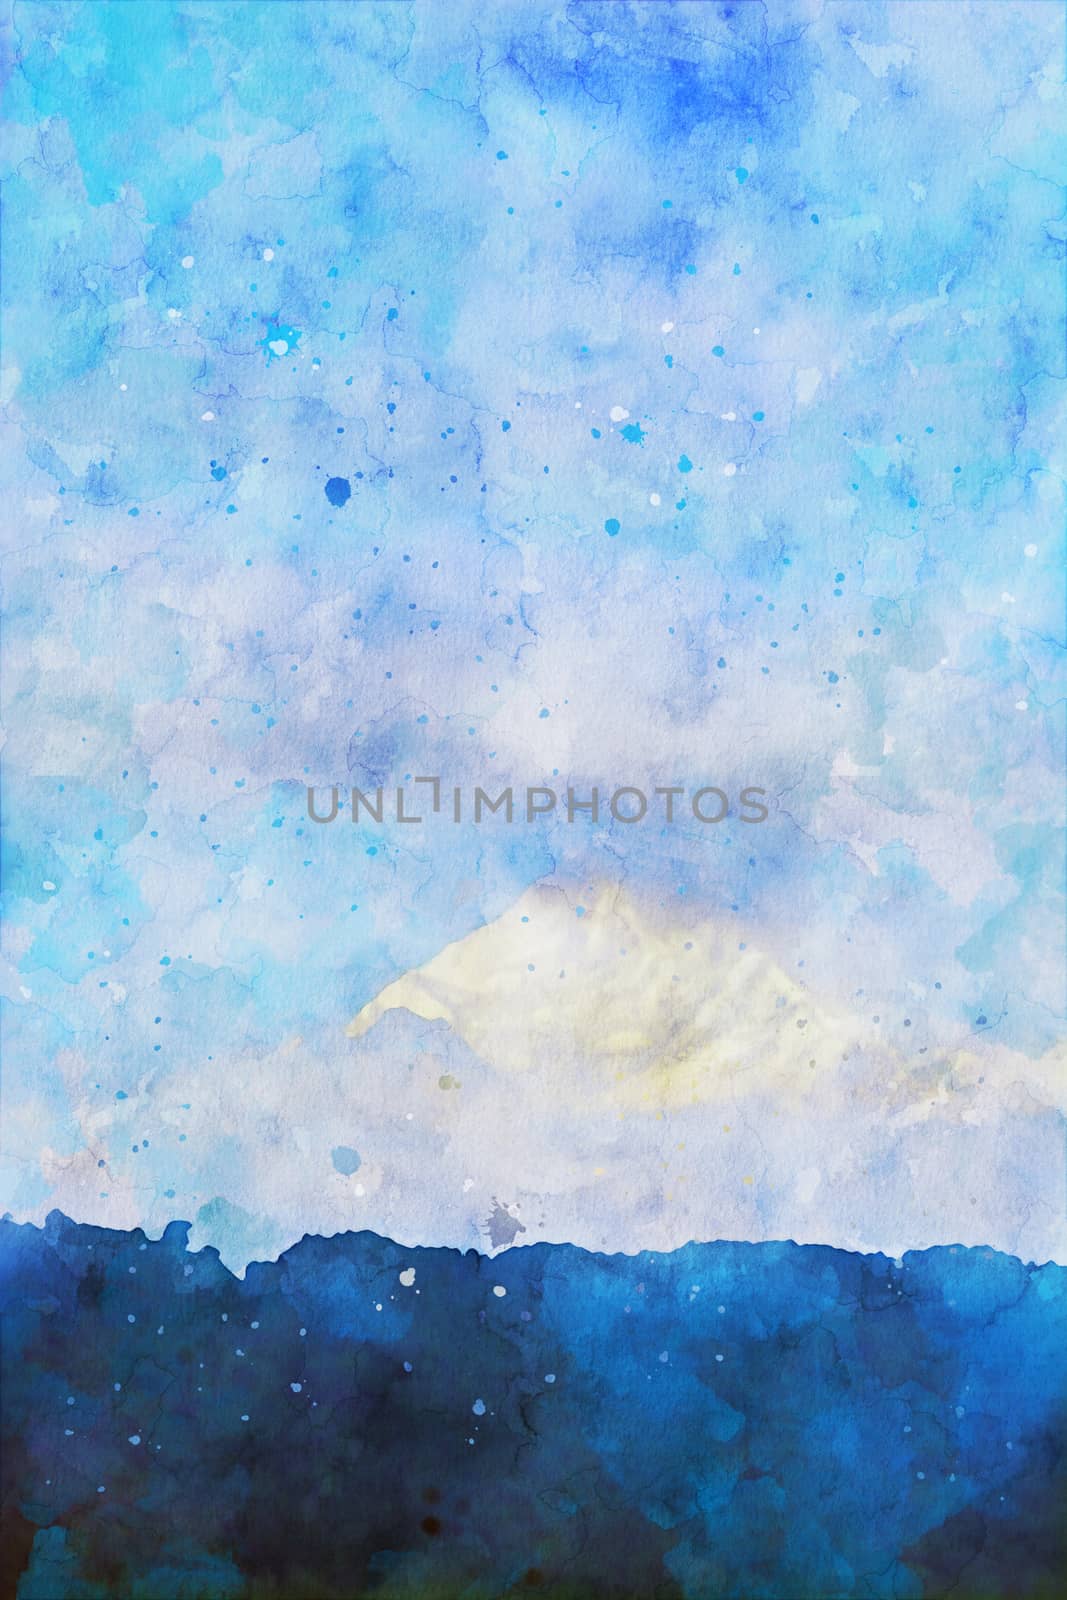 Mountain peak in blue shades with sky background, vertical image, winter season of nature illustration, digital watercolor painting